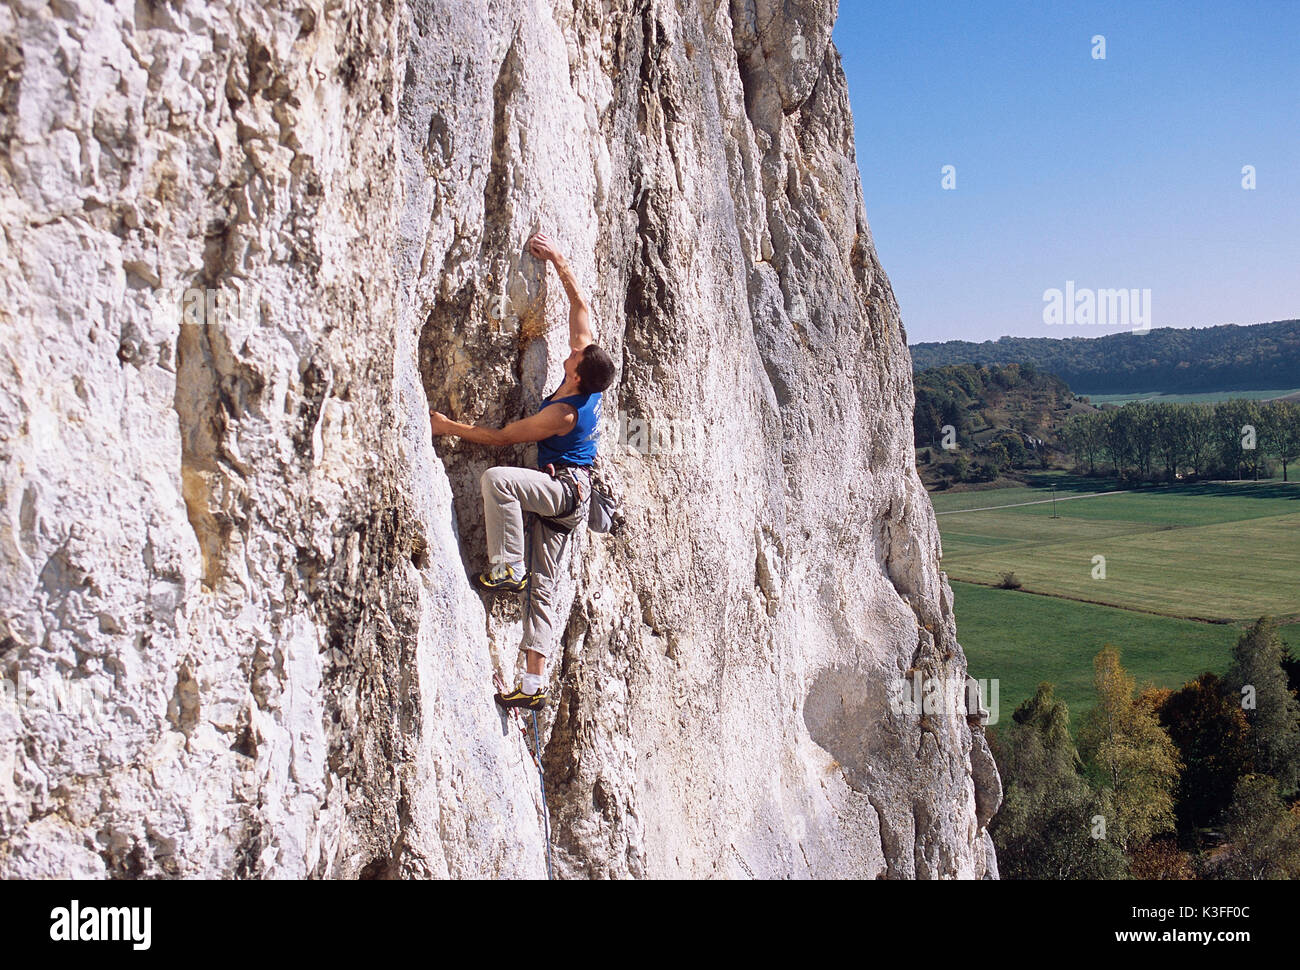 Freeclimber in cliff face at the Burgsteinfelsen, Altmuehl valley Stock Photo